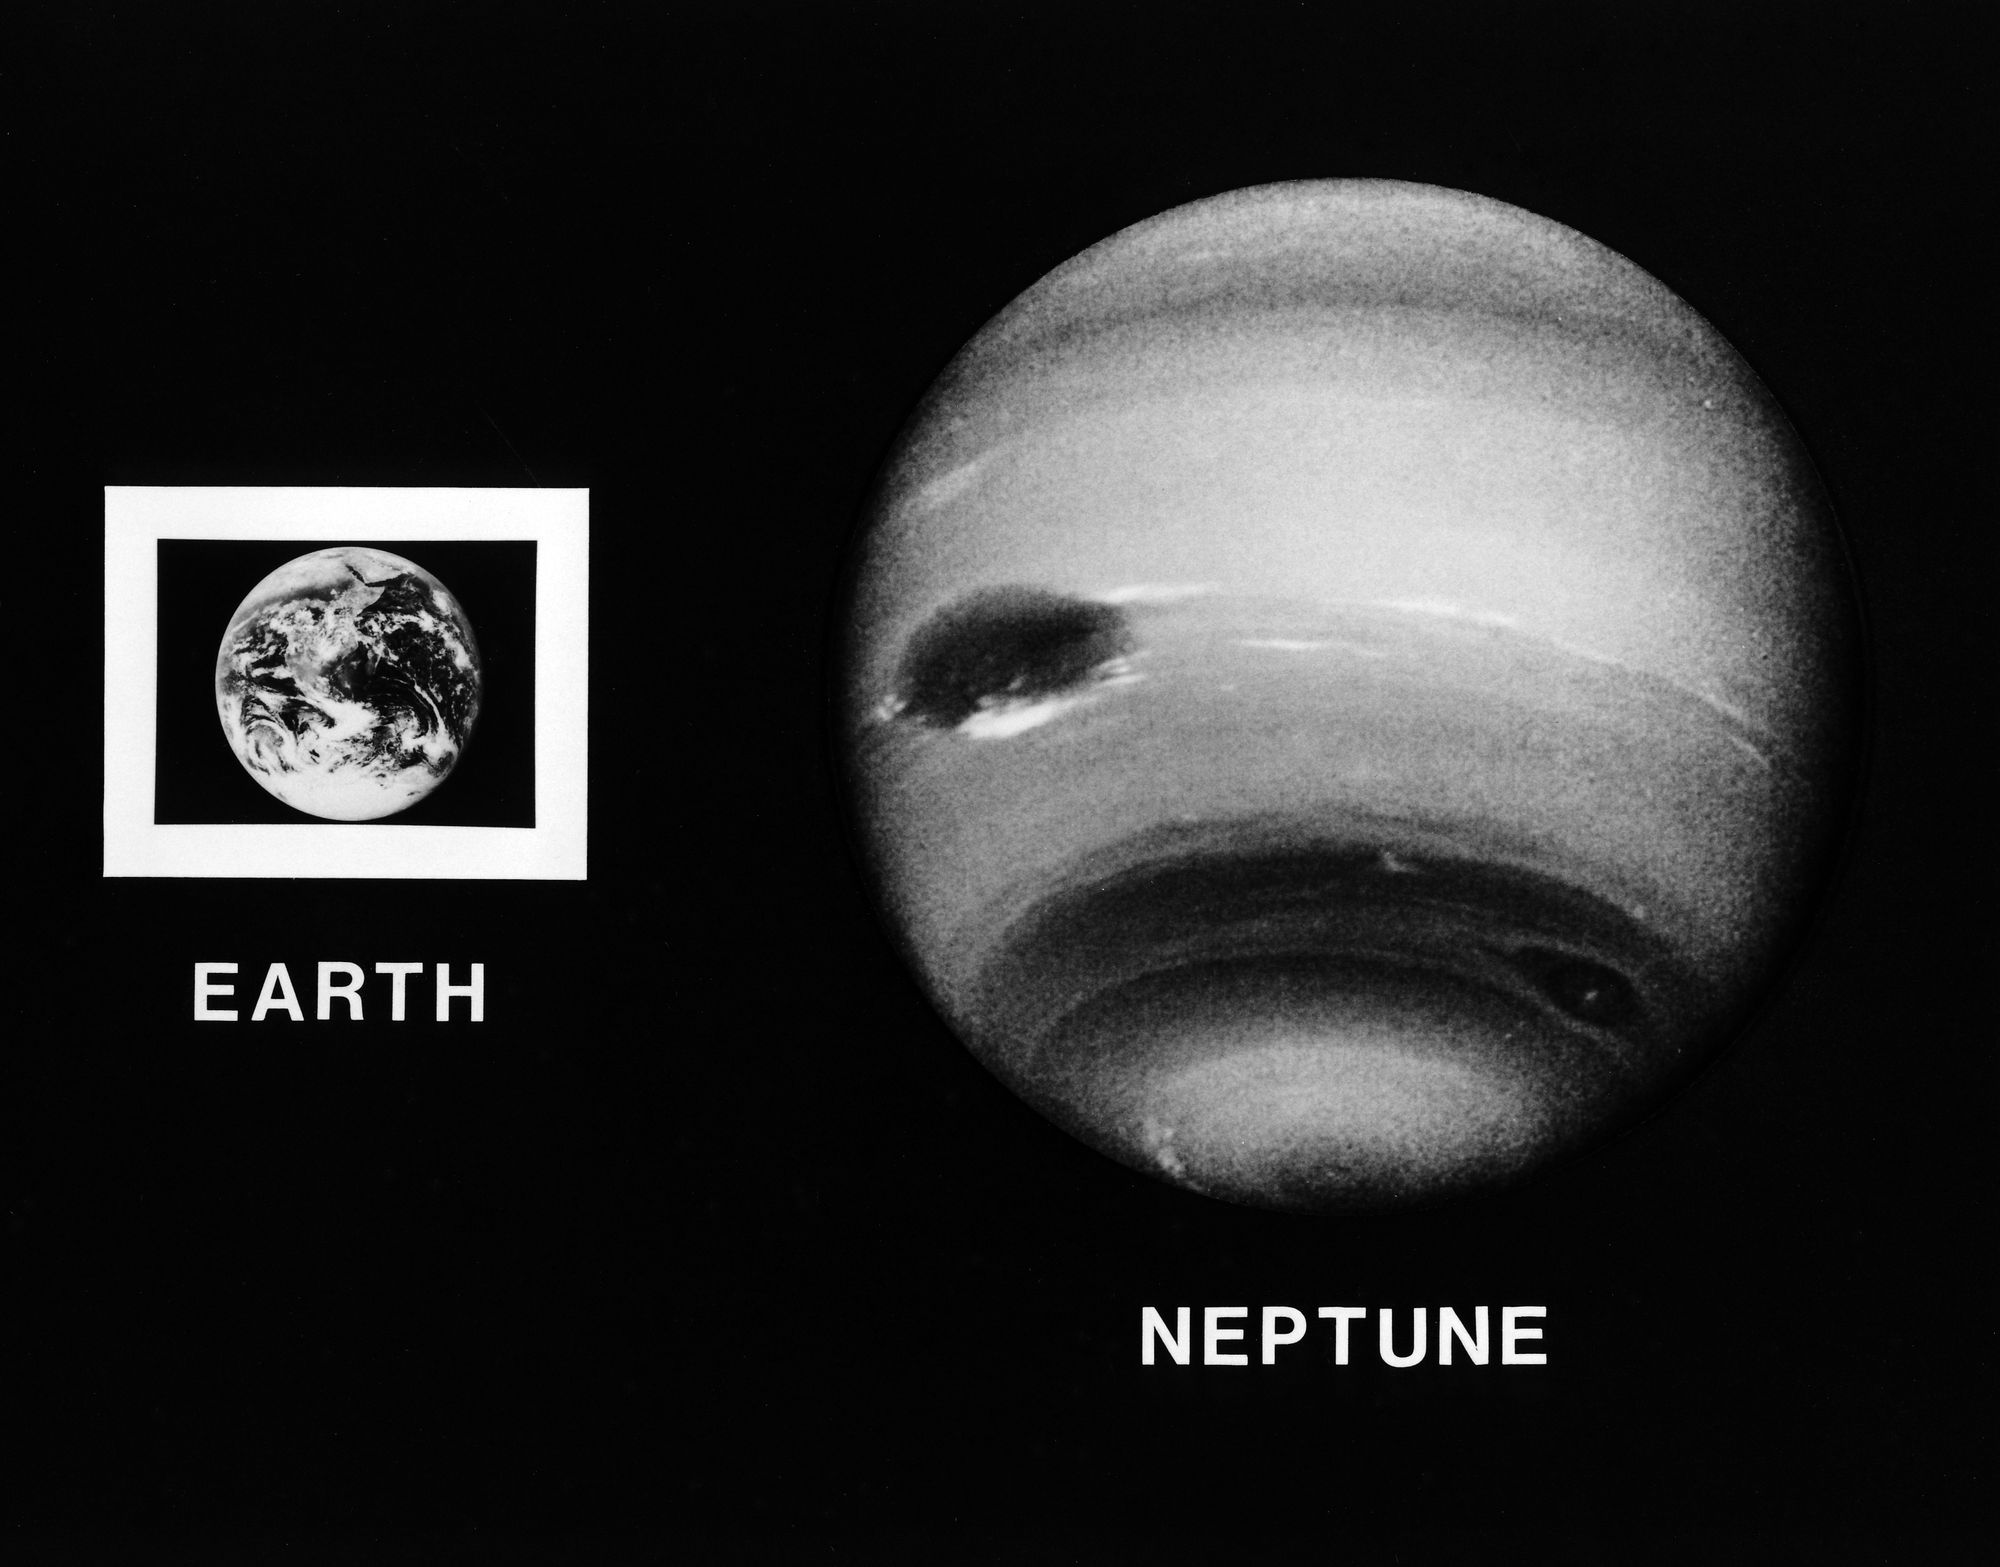 Neptune and the Earth are shown at the same scale.  The diameter of Neptune is 4